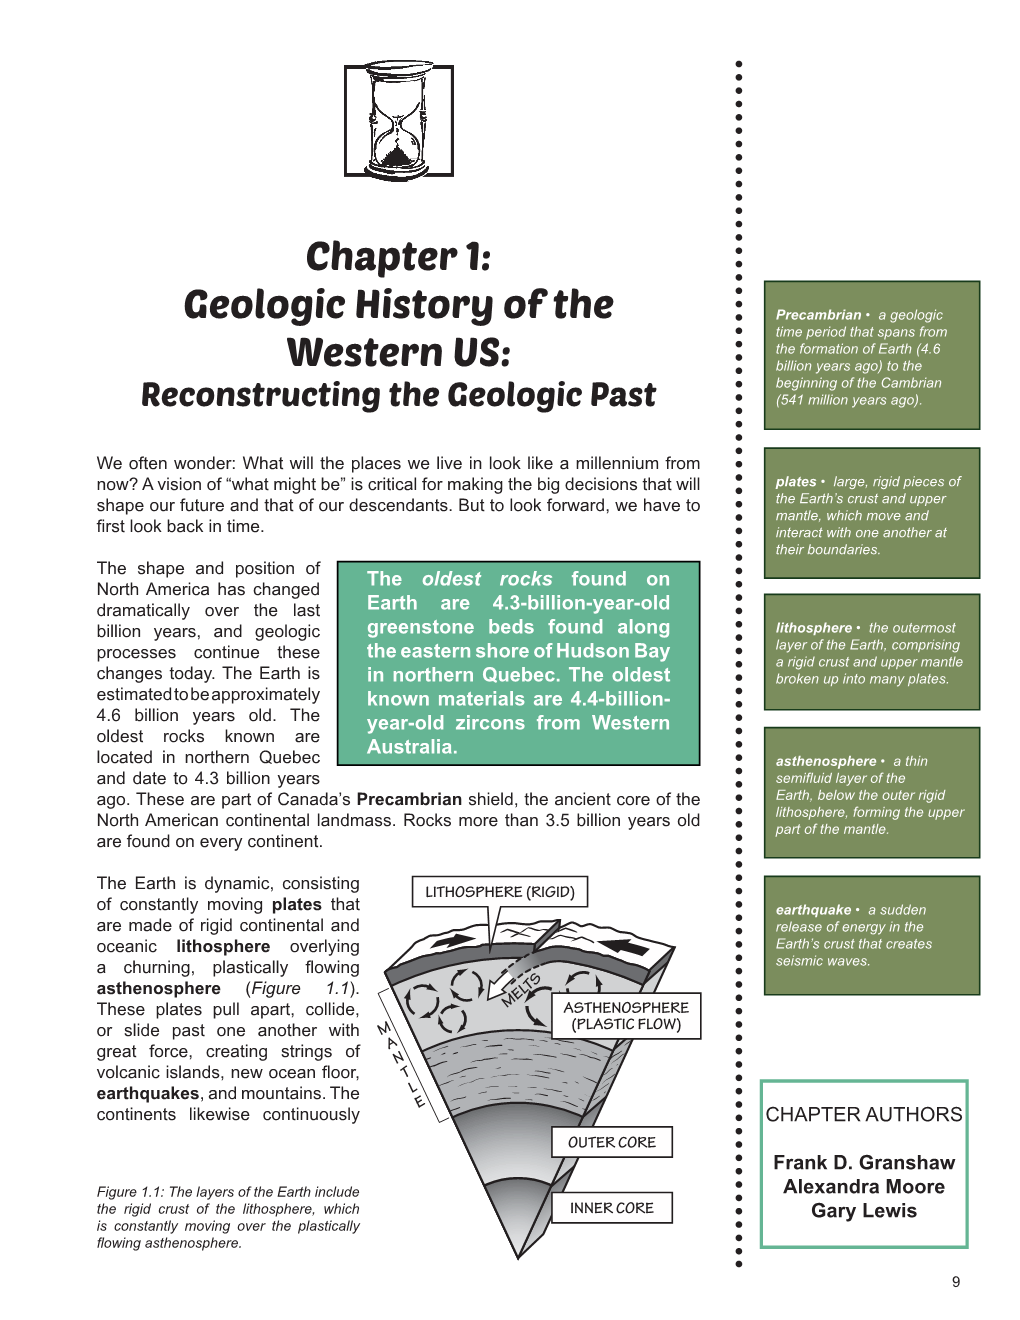 Chapter 1: Geologic History of the Western